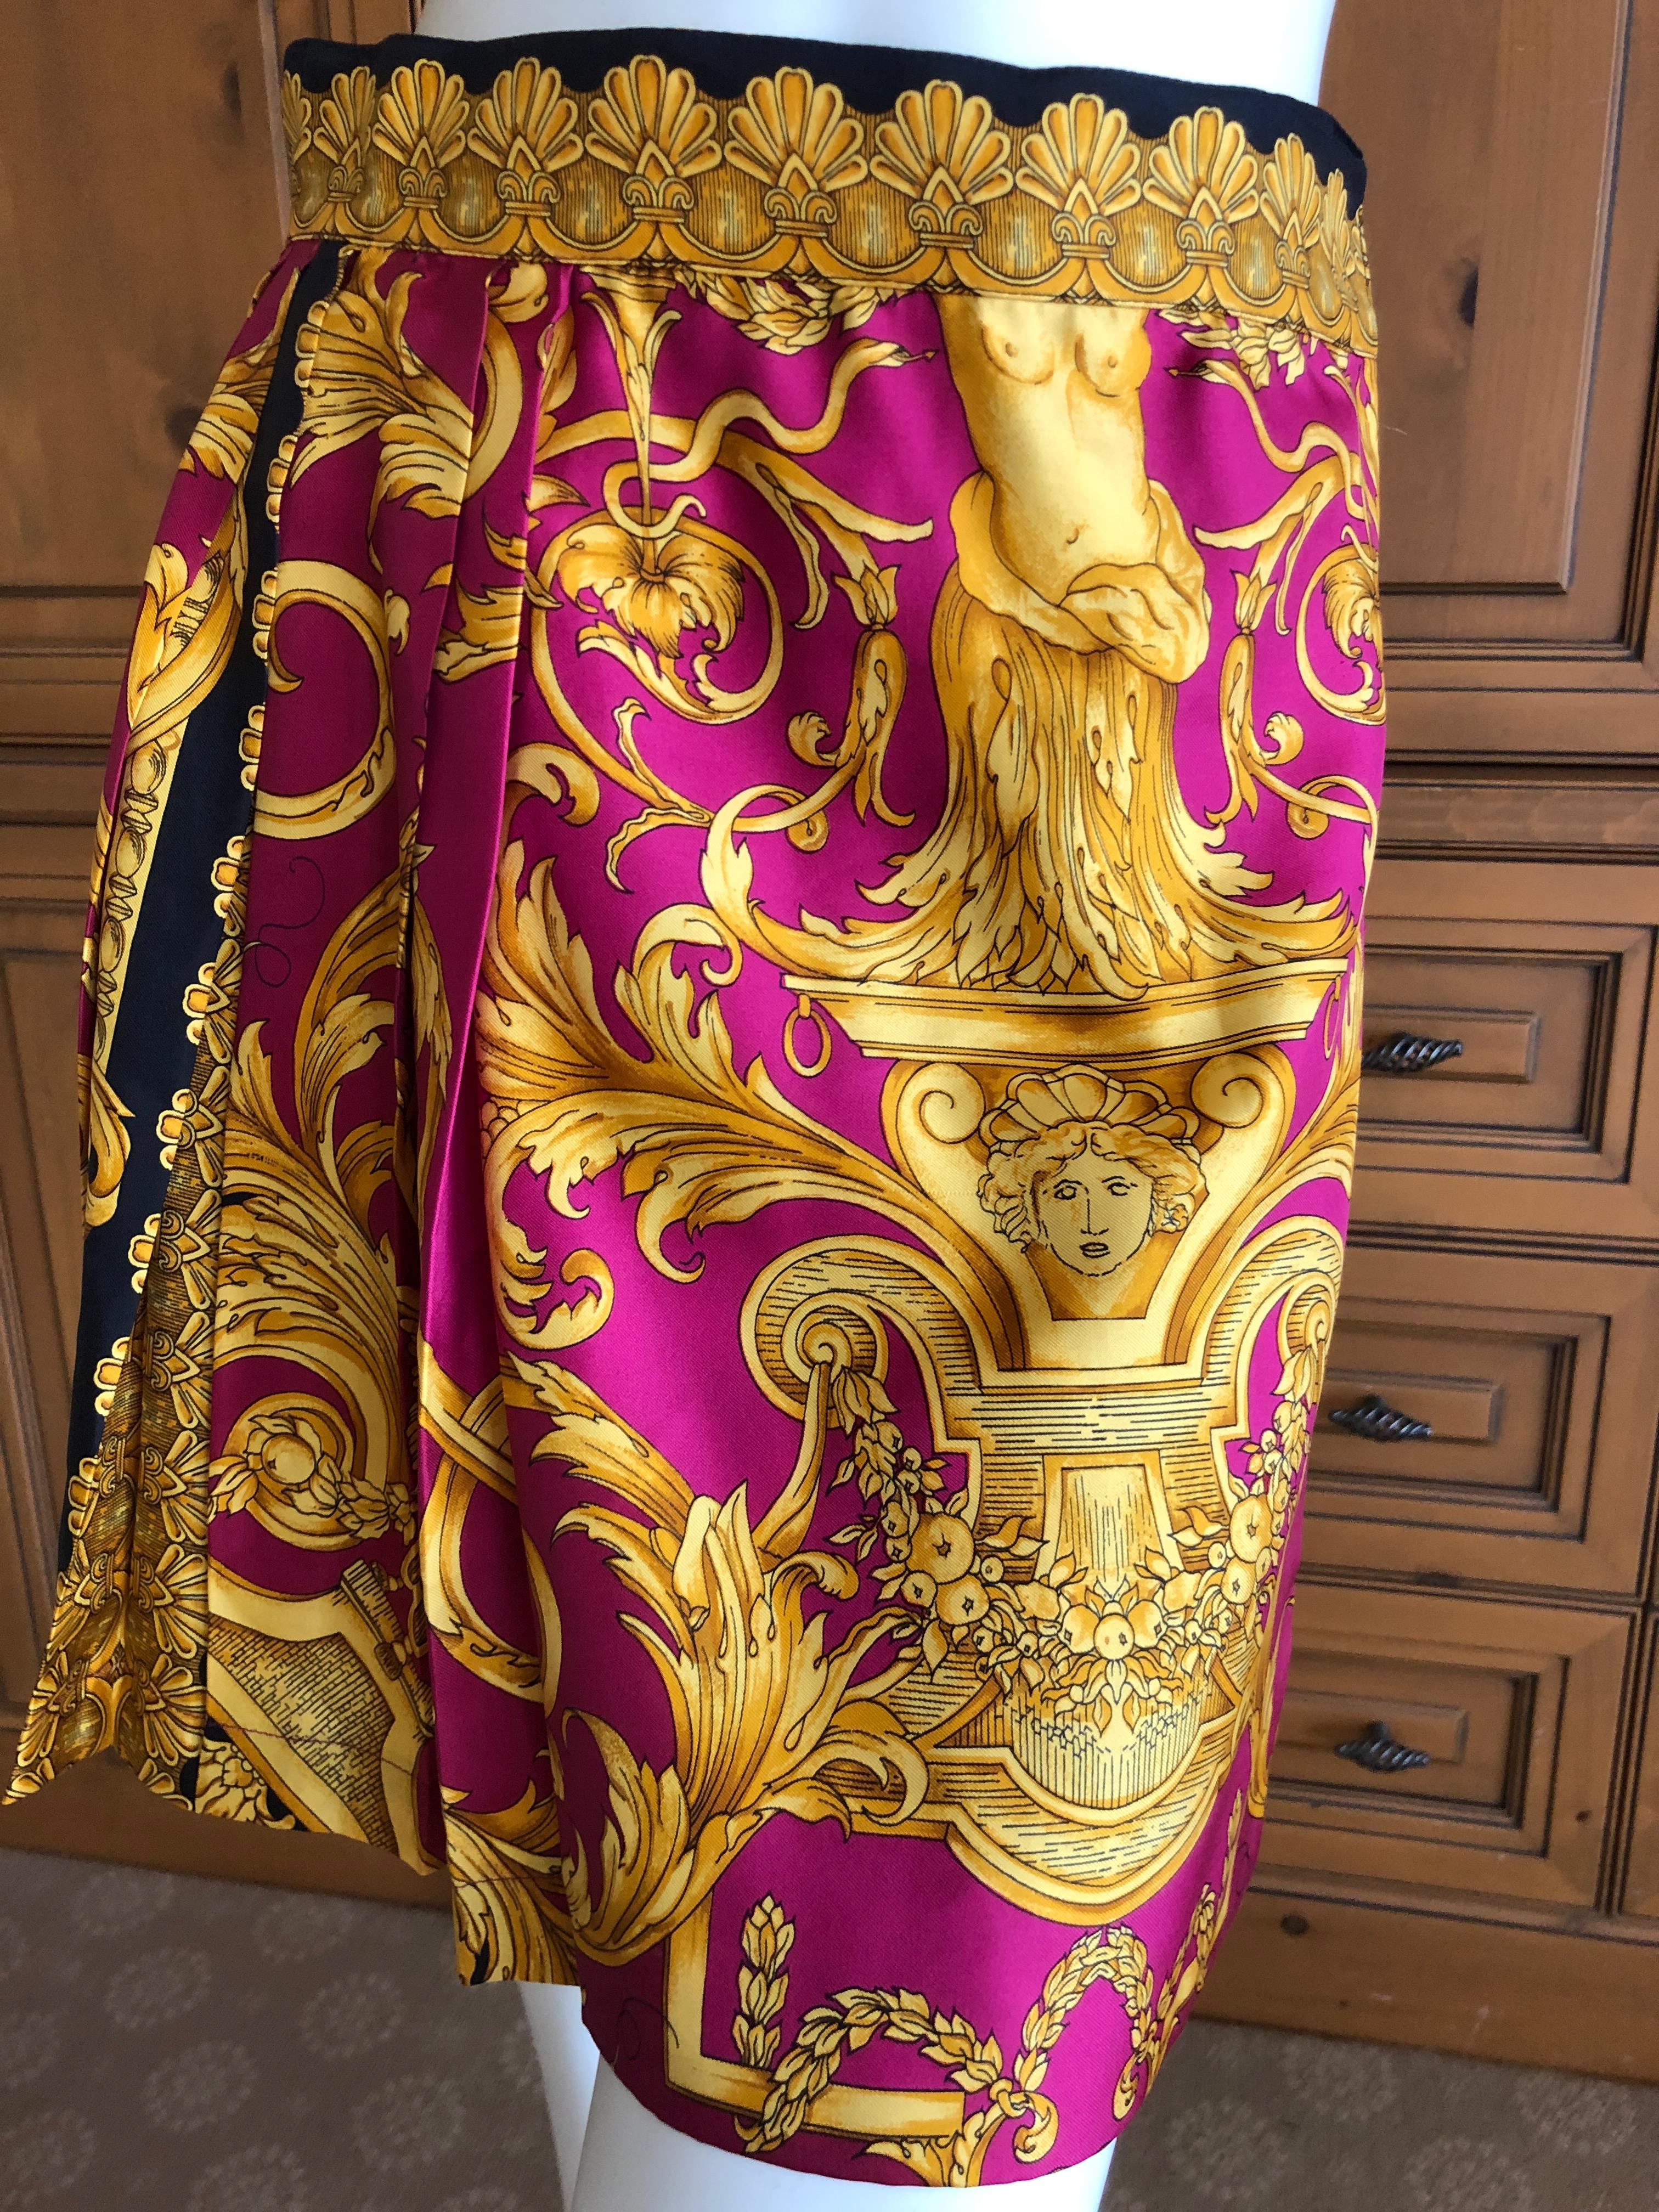 Gianni Versace 1987 Fuchsia and Gold Baroque Print Pleated Mini Skirt Suit In Excellent Condition For Sale In Cloverdale, CA